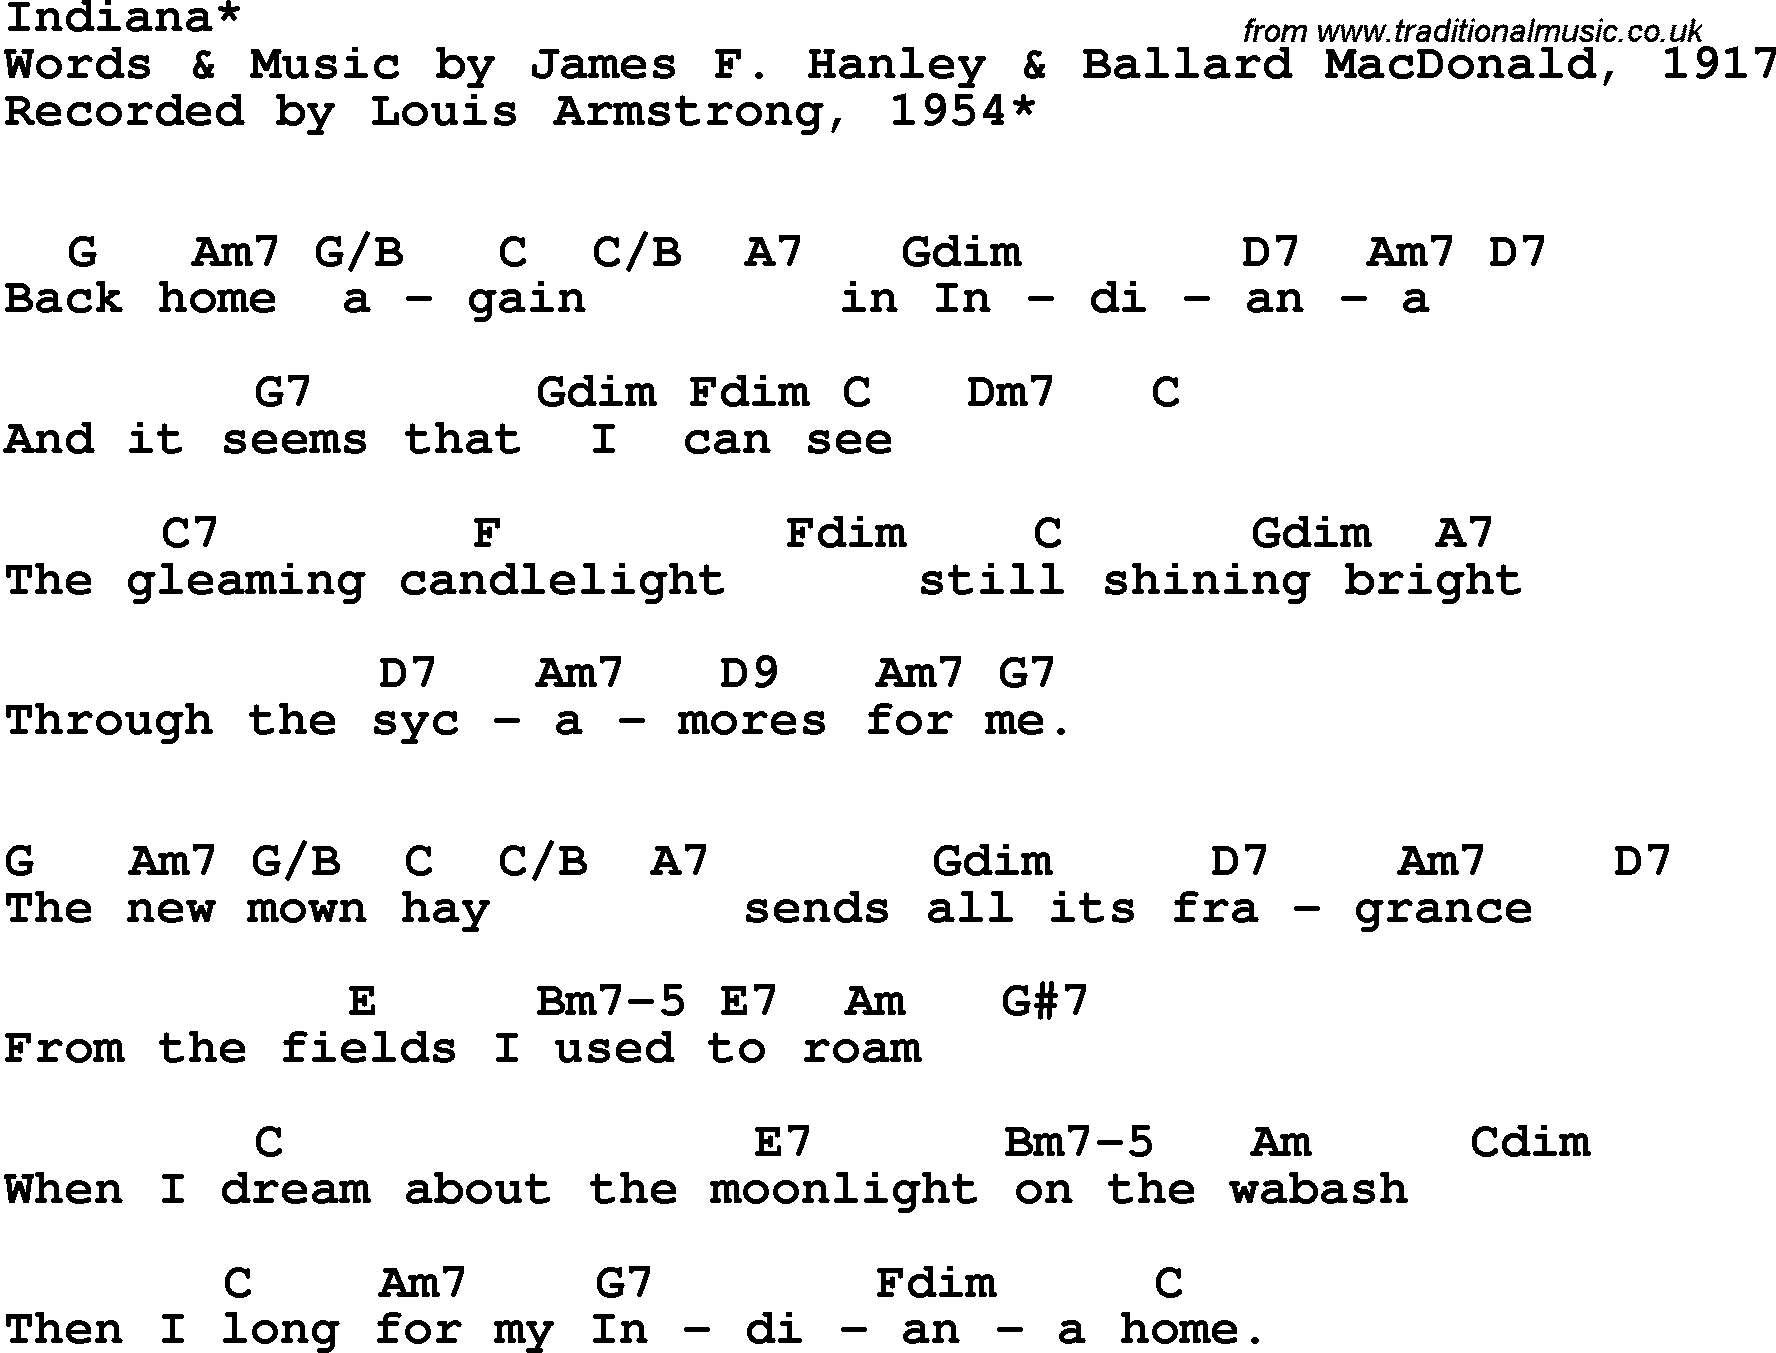 Song Lyrics with guitar chords for Indiana - Louis Armstrong, 1954